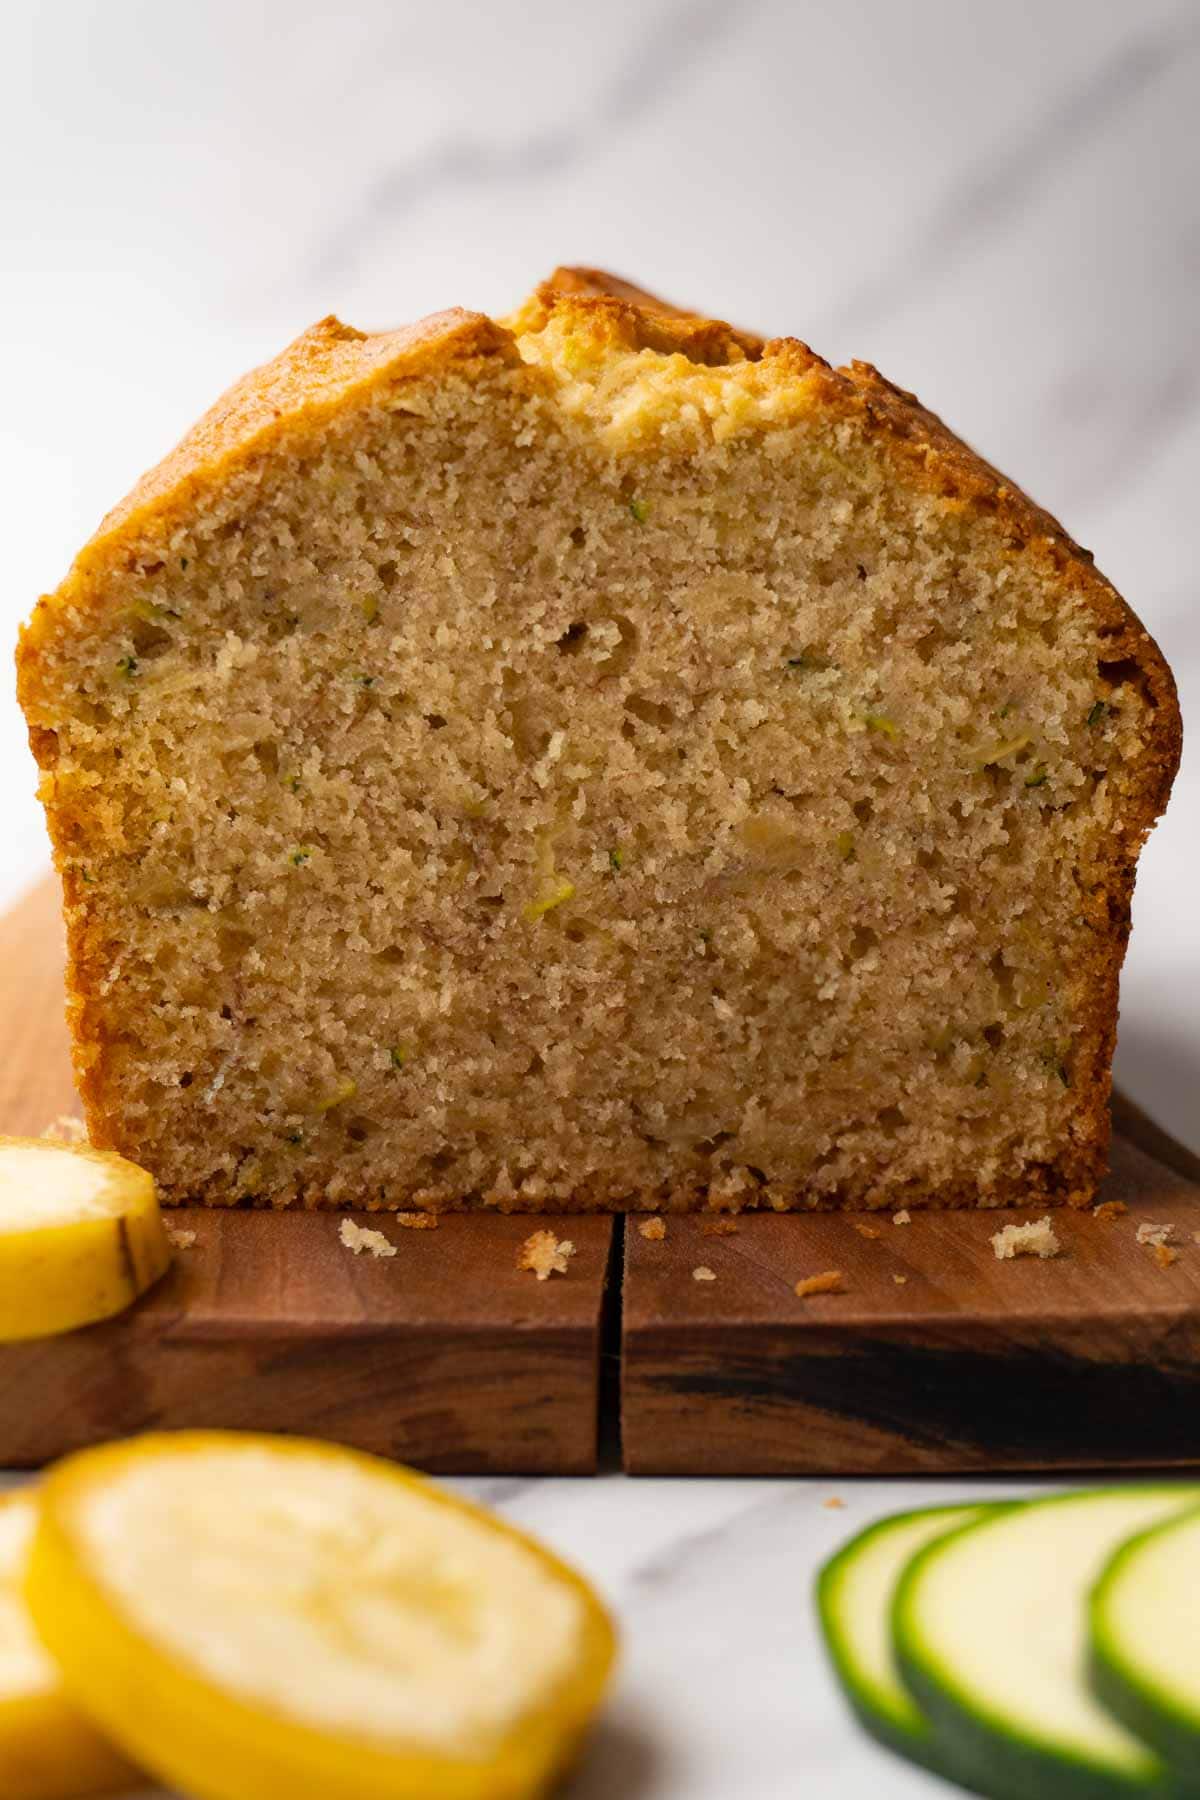 A loaf of bread with zucchini and bananas on a wooden serving board; one slice is missing.